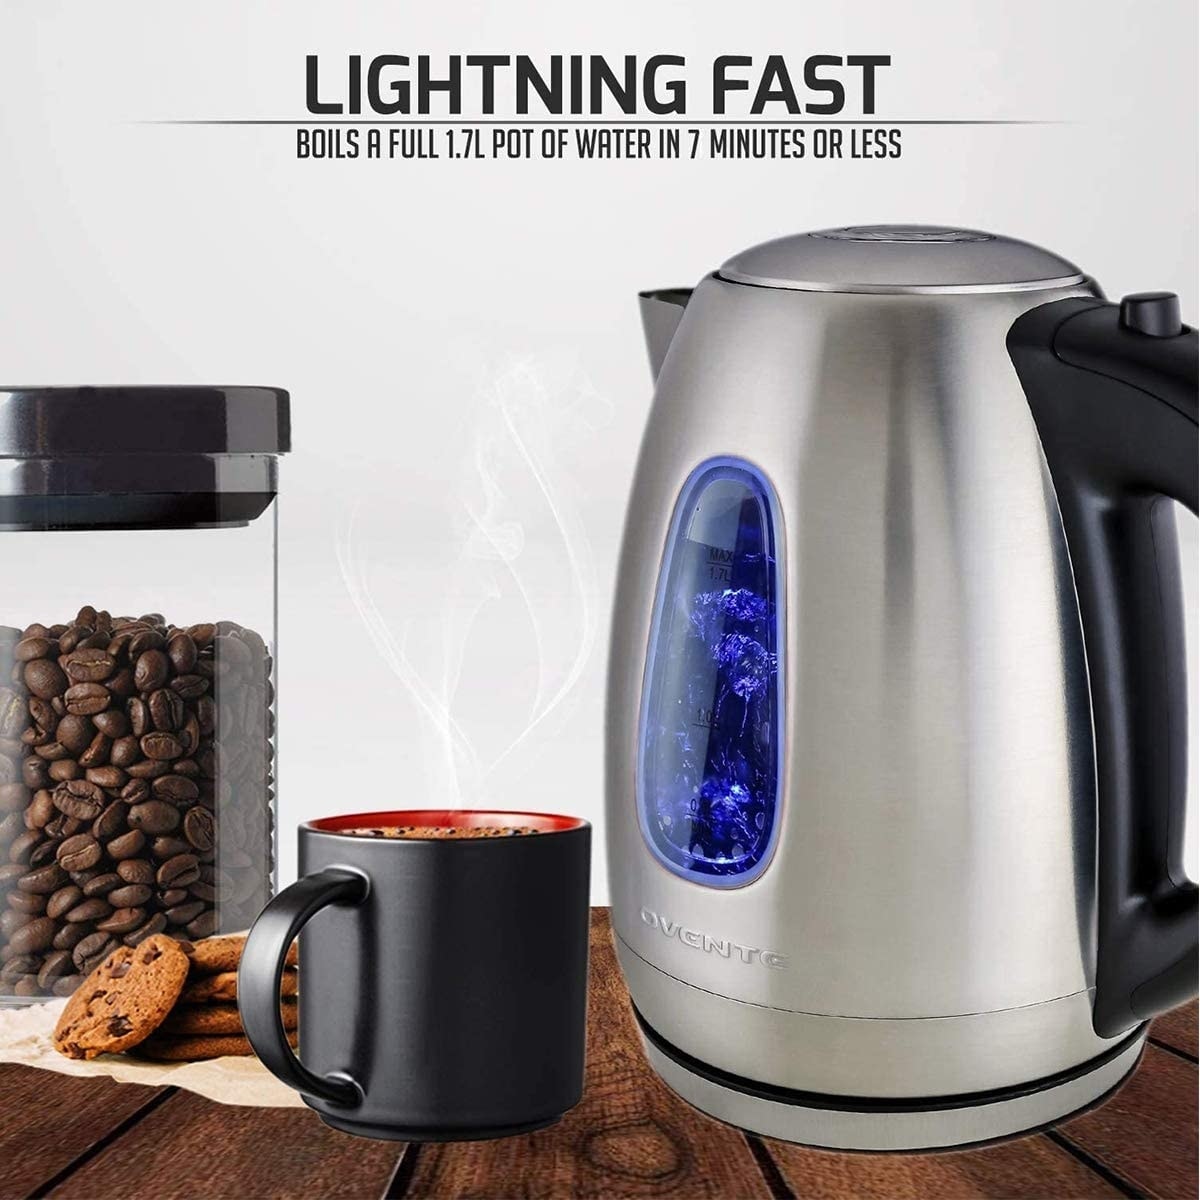 https://ak1.ostkcdn.com/images/products/is/images/direct/524b2d72e53cf92a0da0e37a1fcd945458a5f834/Ovente-Portable-Electric-Hot-Water-Kettle-1.7-Liter-Stainless-Steel-1100-Watt-Power-Fast-Heating-Element%2C-KS96-Series.jpg